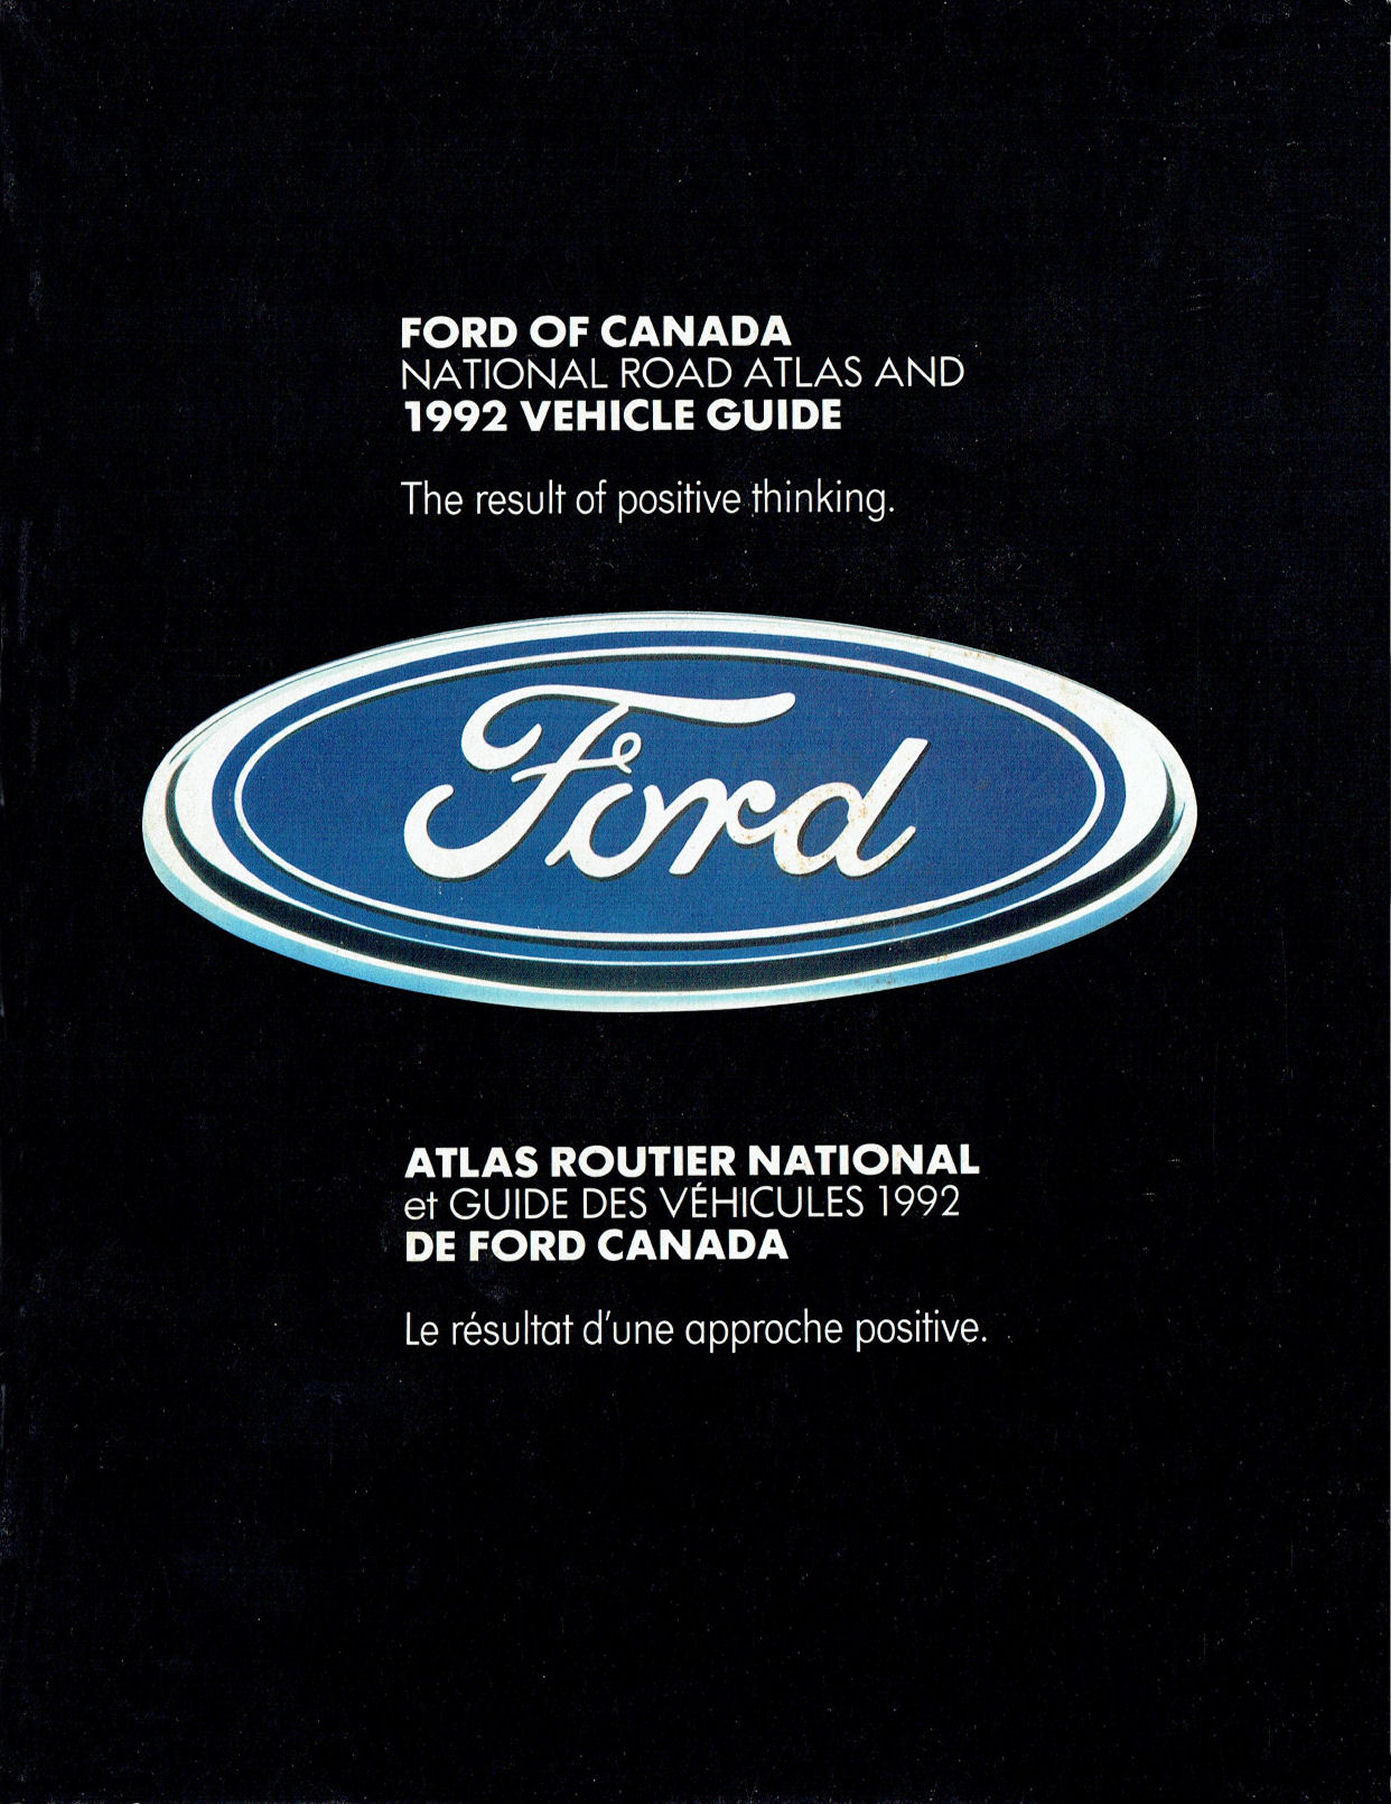 1992_Ford_Canada_Road_Atlas__Guide-01